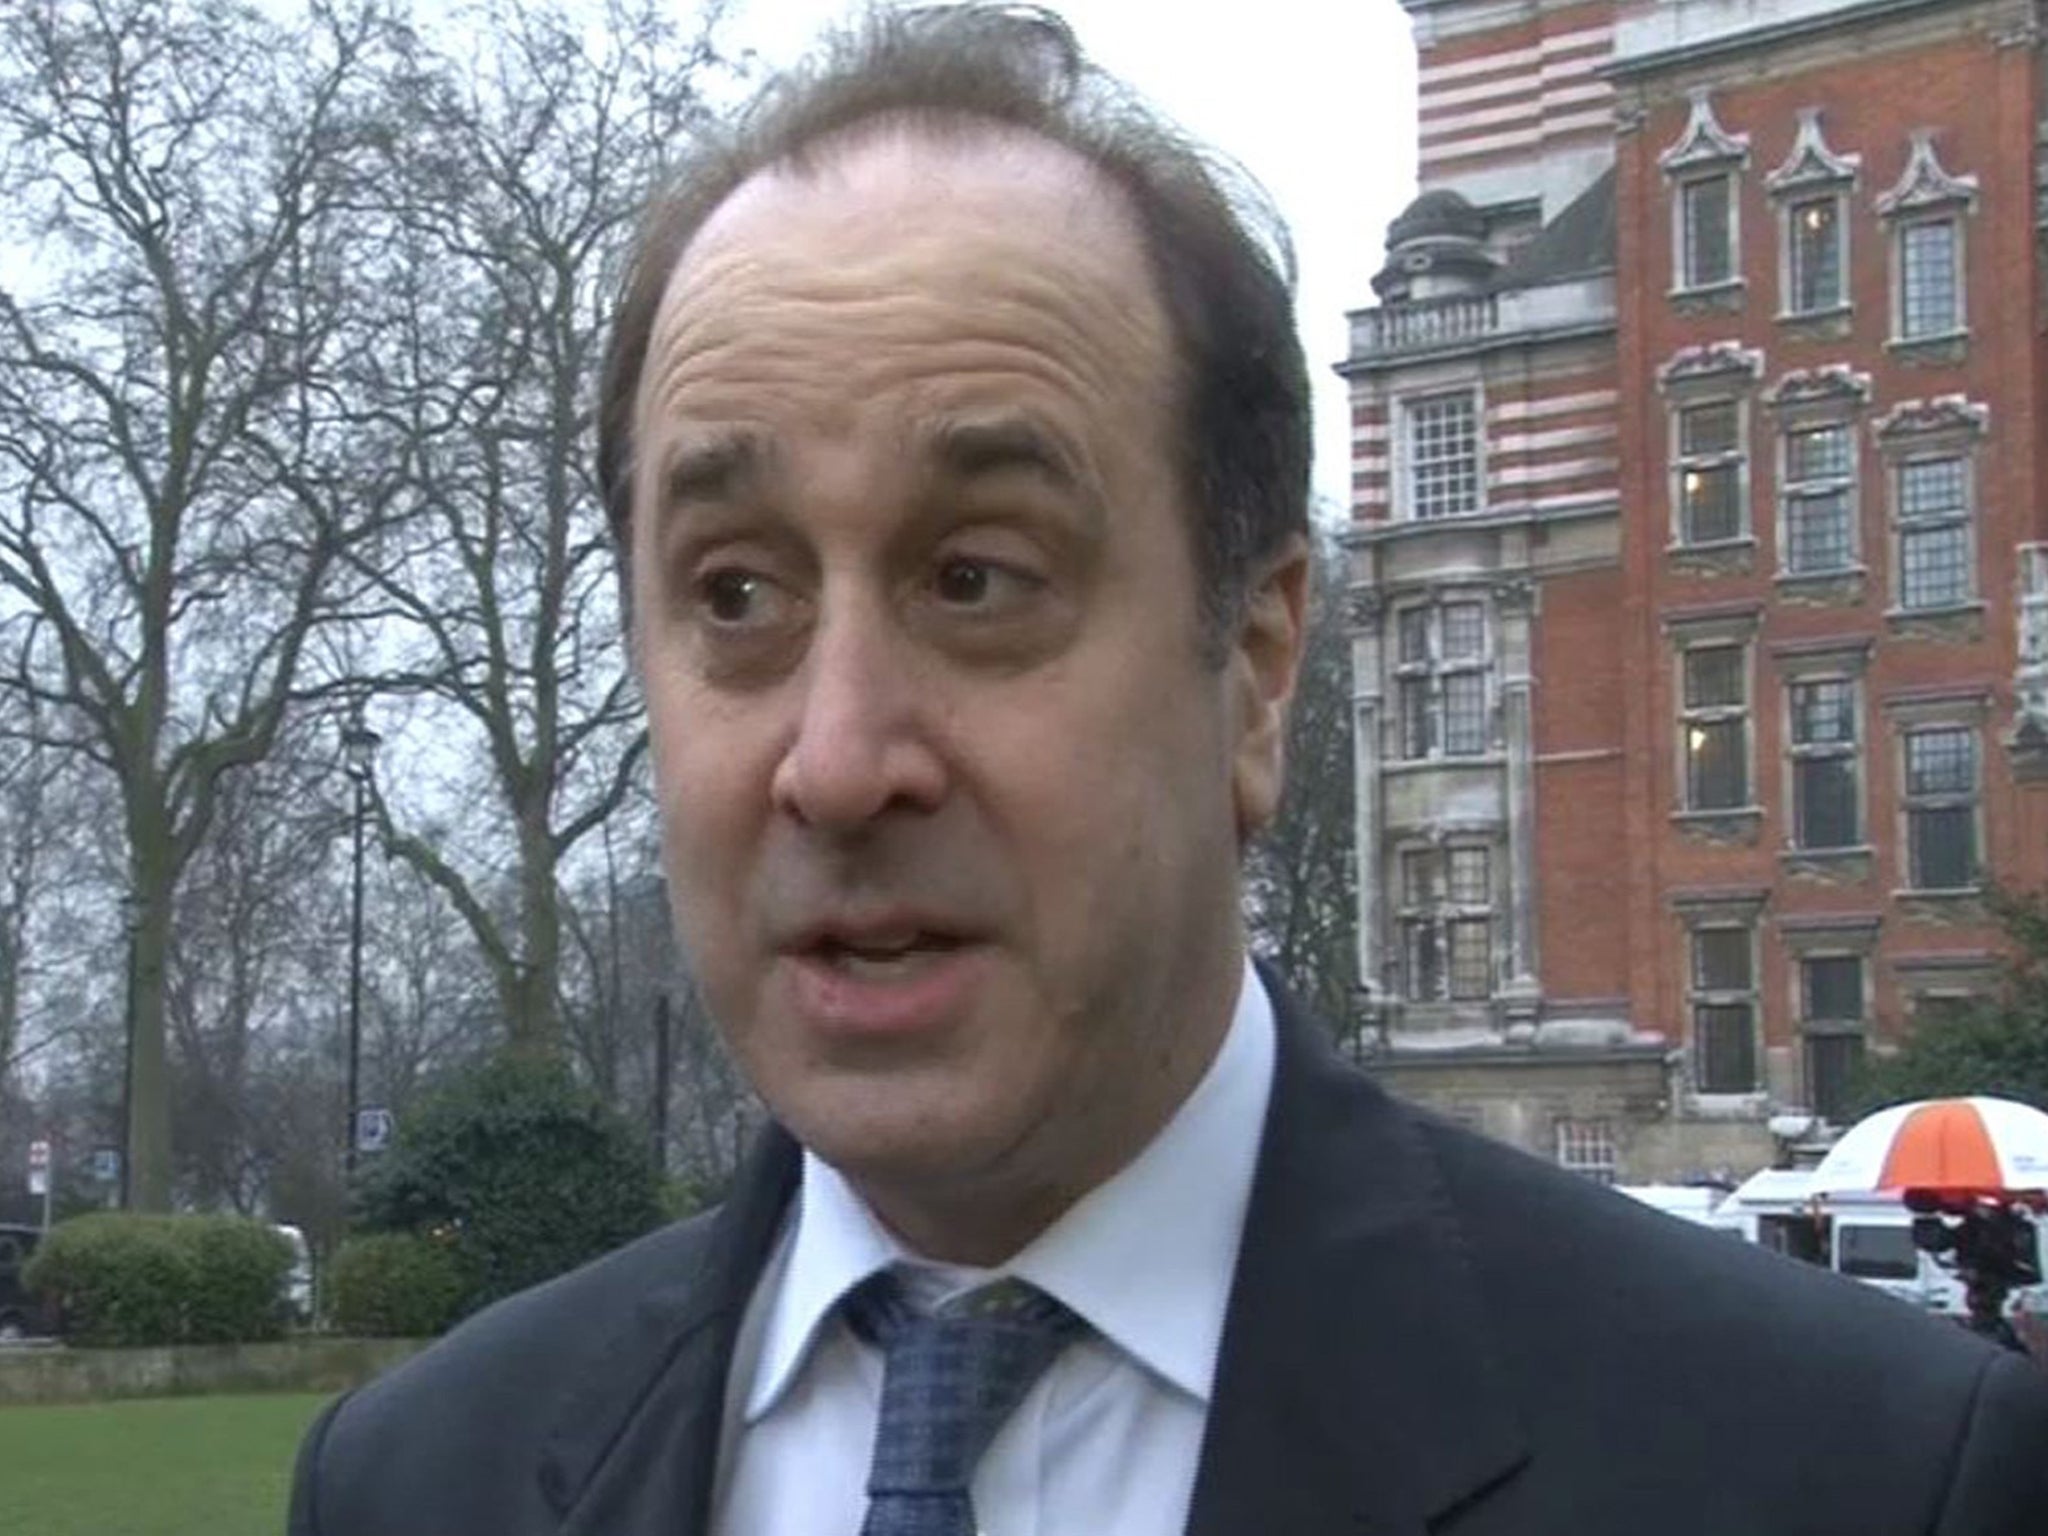 Brooks Newmark resigned following a cyber-sex scandal